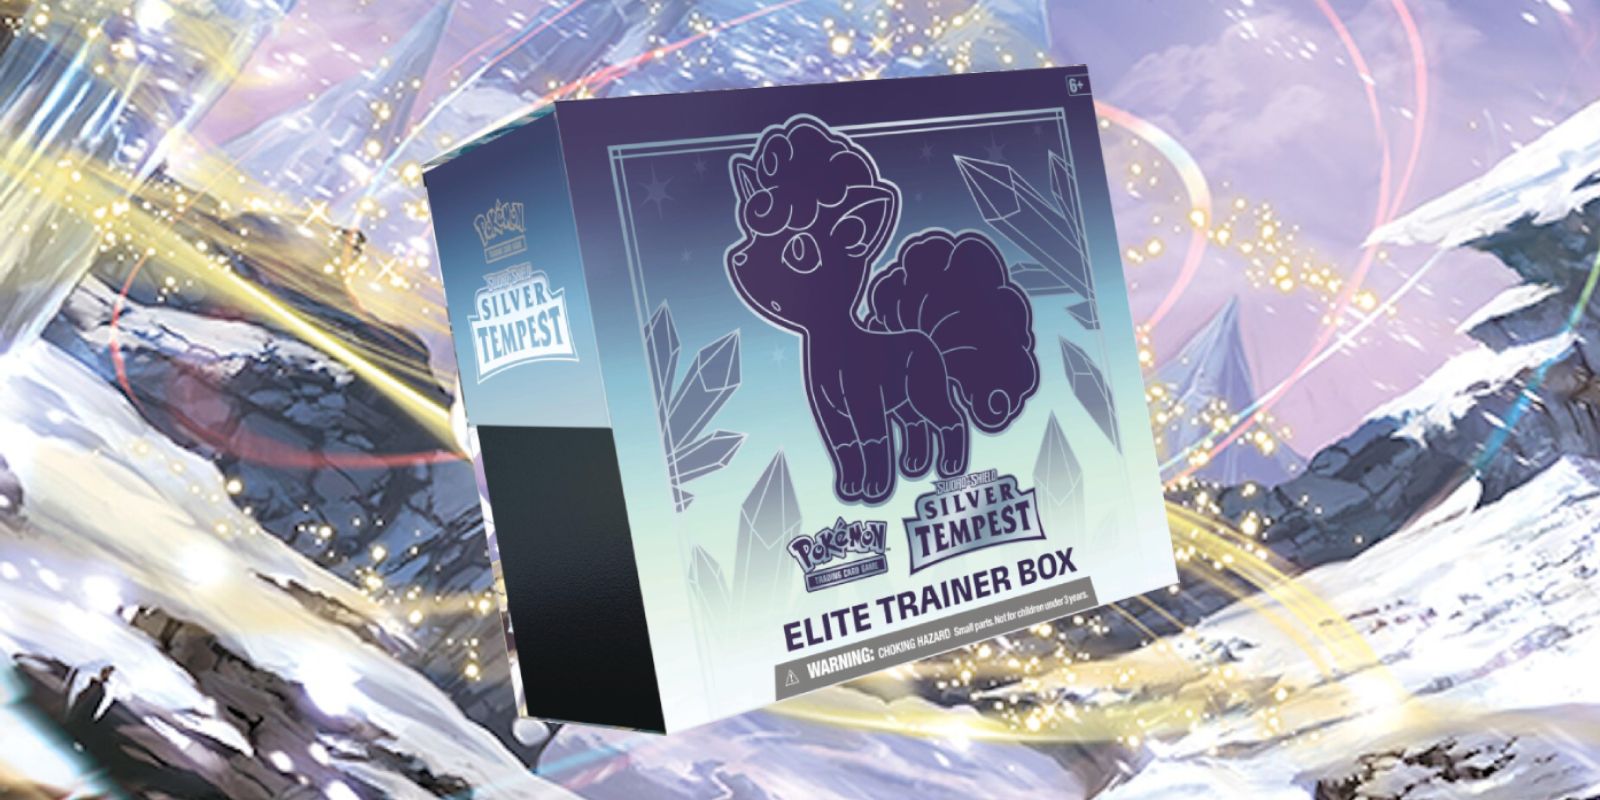 The Pokémon TCG Silver Tempest Elite Trainer Box in front of a snowy background.